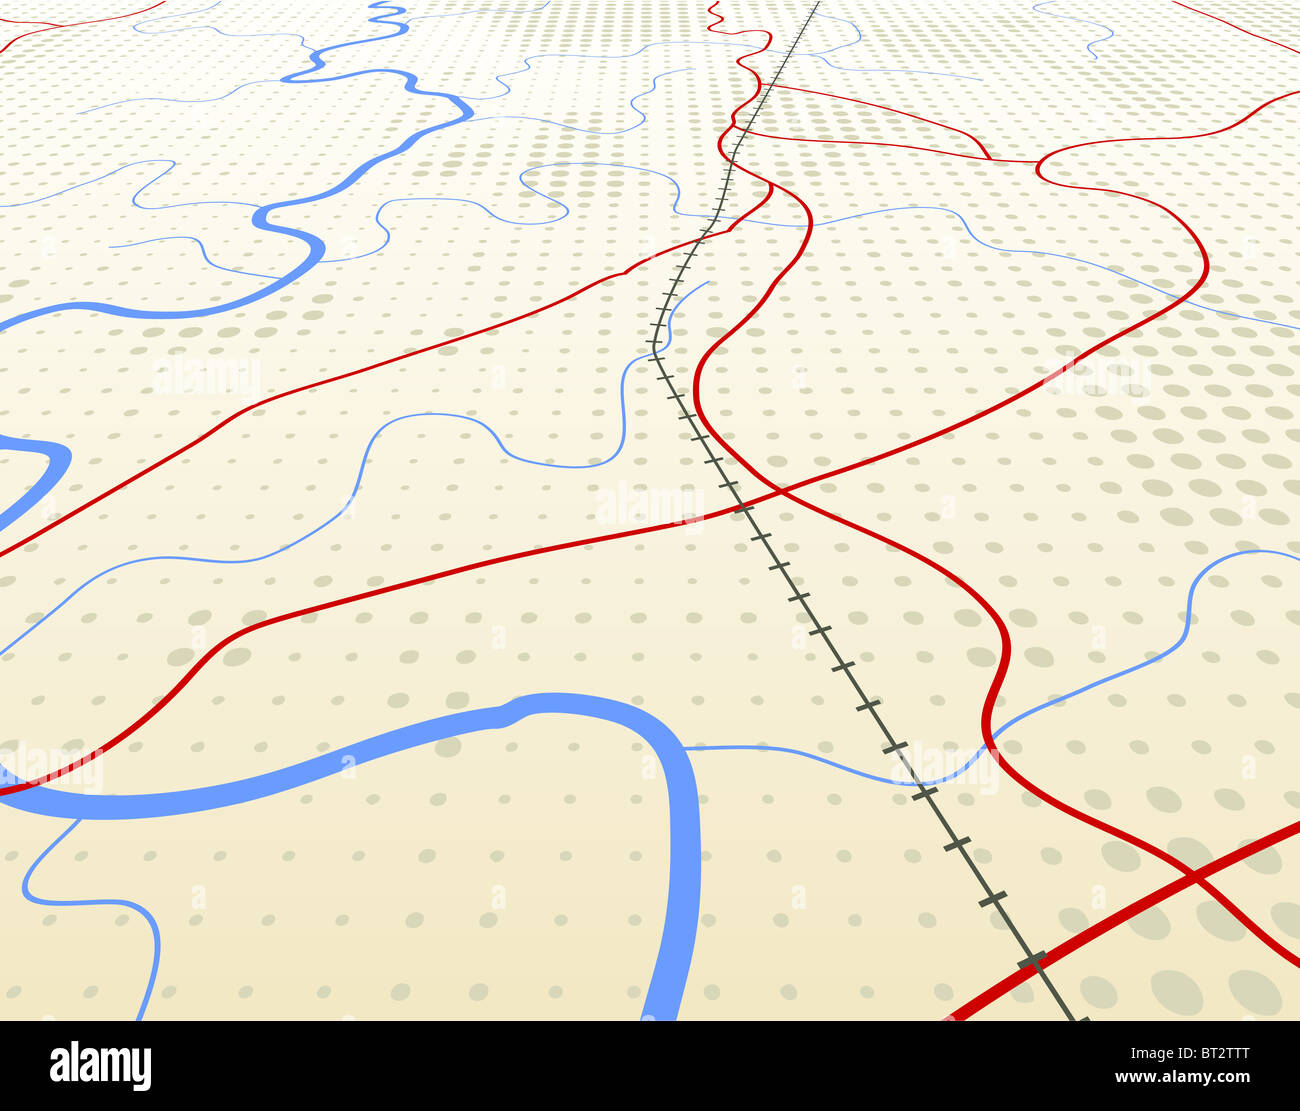 Illustration of an angled generic road-map without names Stock Photo